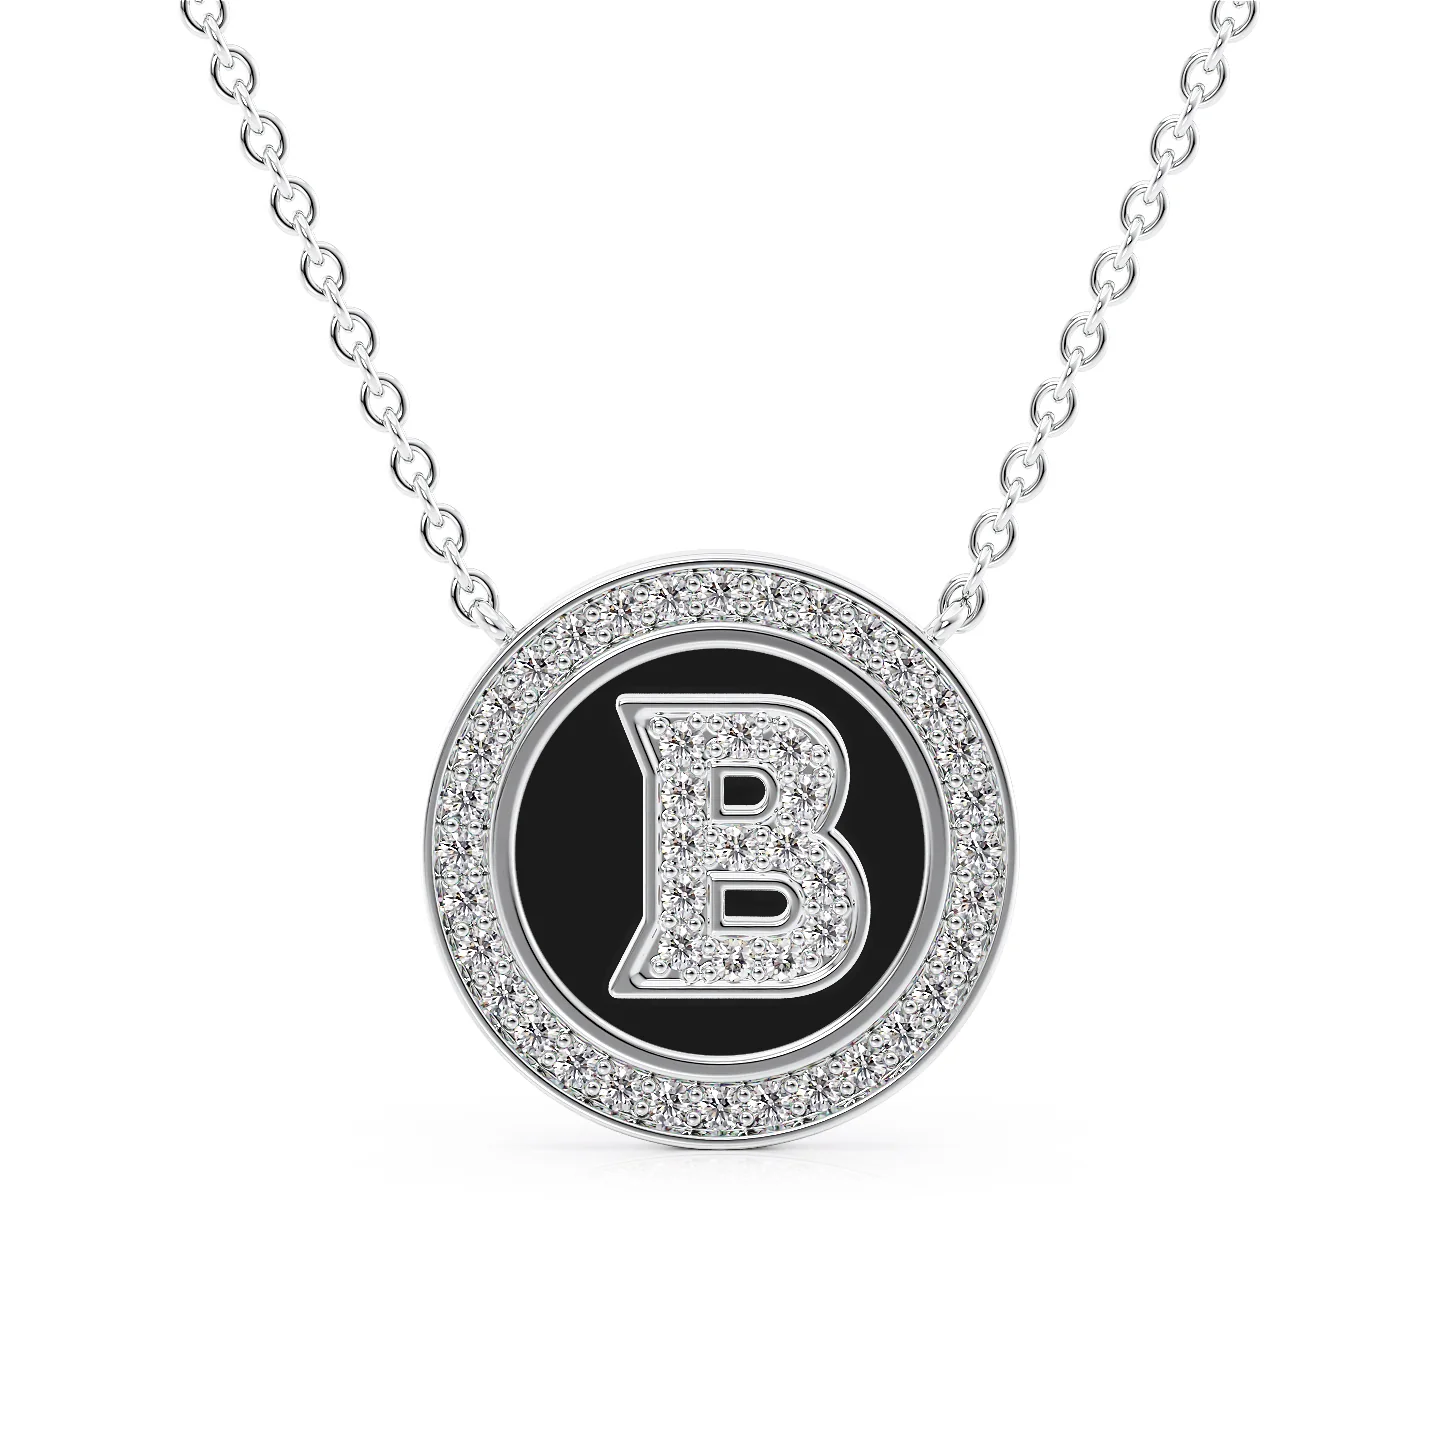 Shop Letter B Diamond Necklace in 14K White Gold at I.D Jewelry